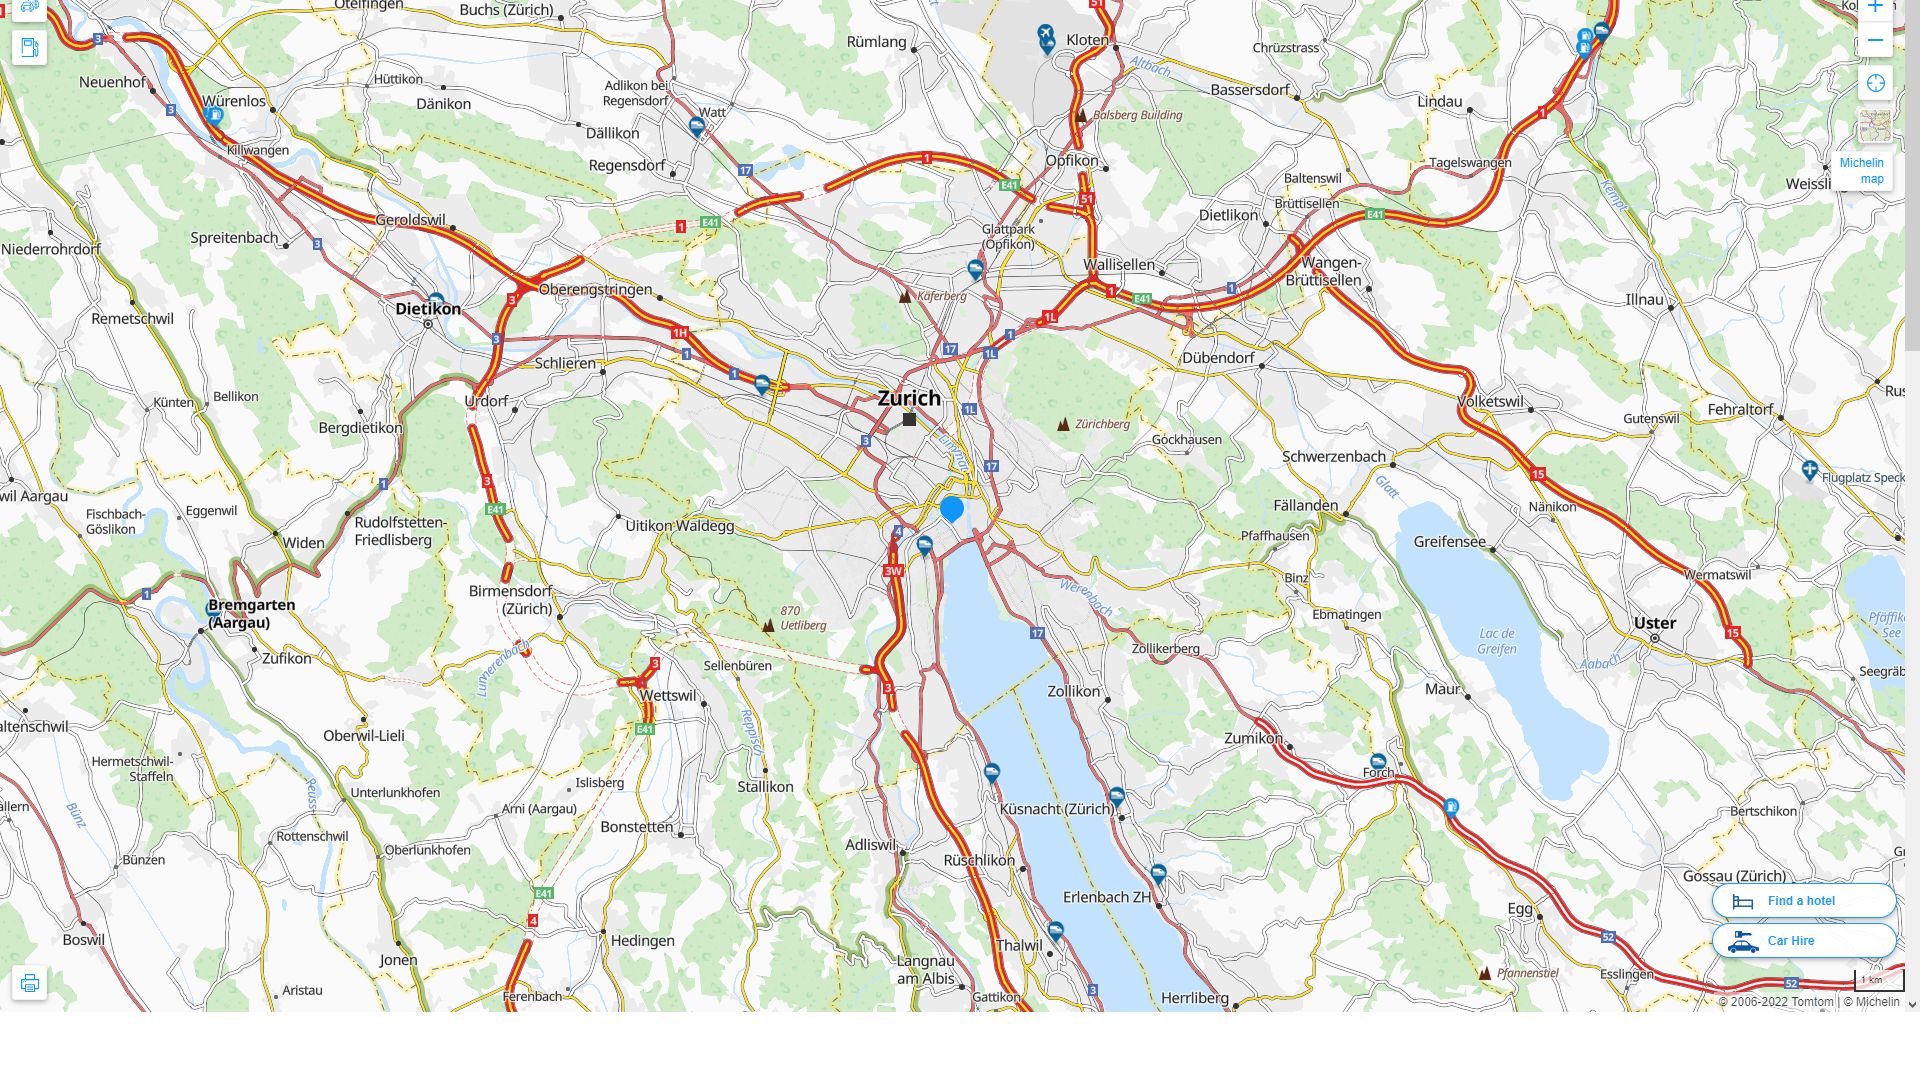 Zurich Highway and Road Map